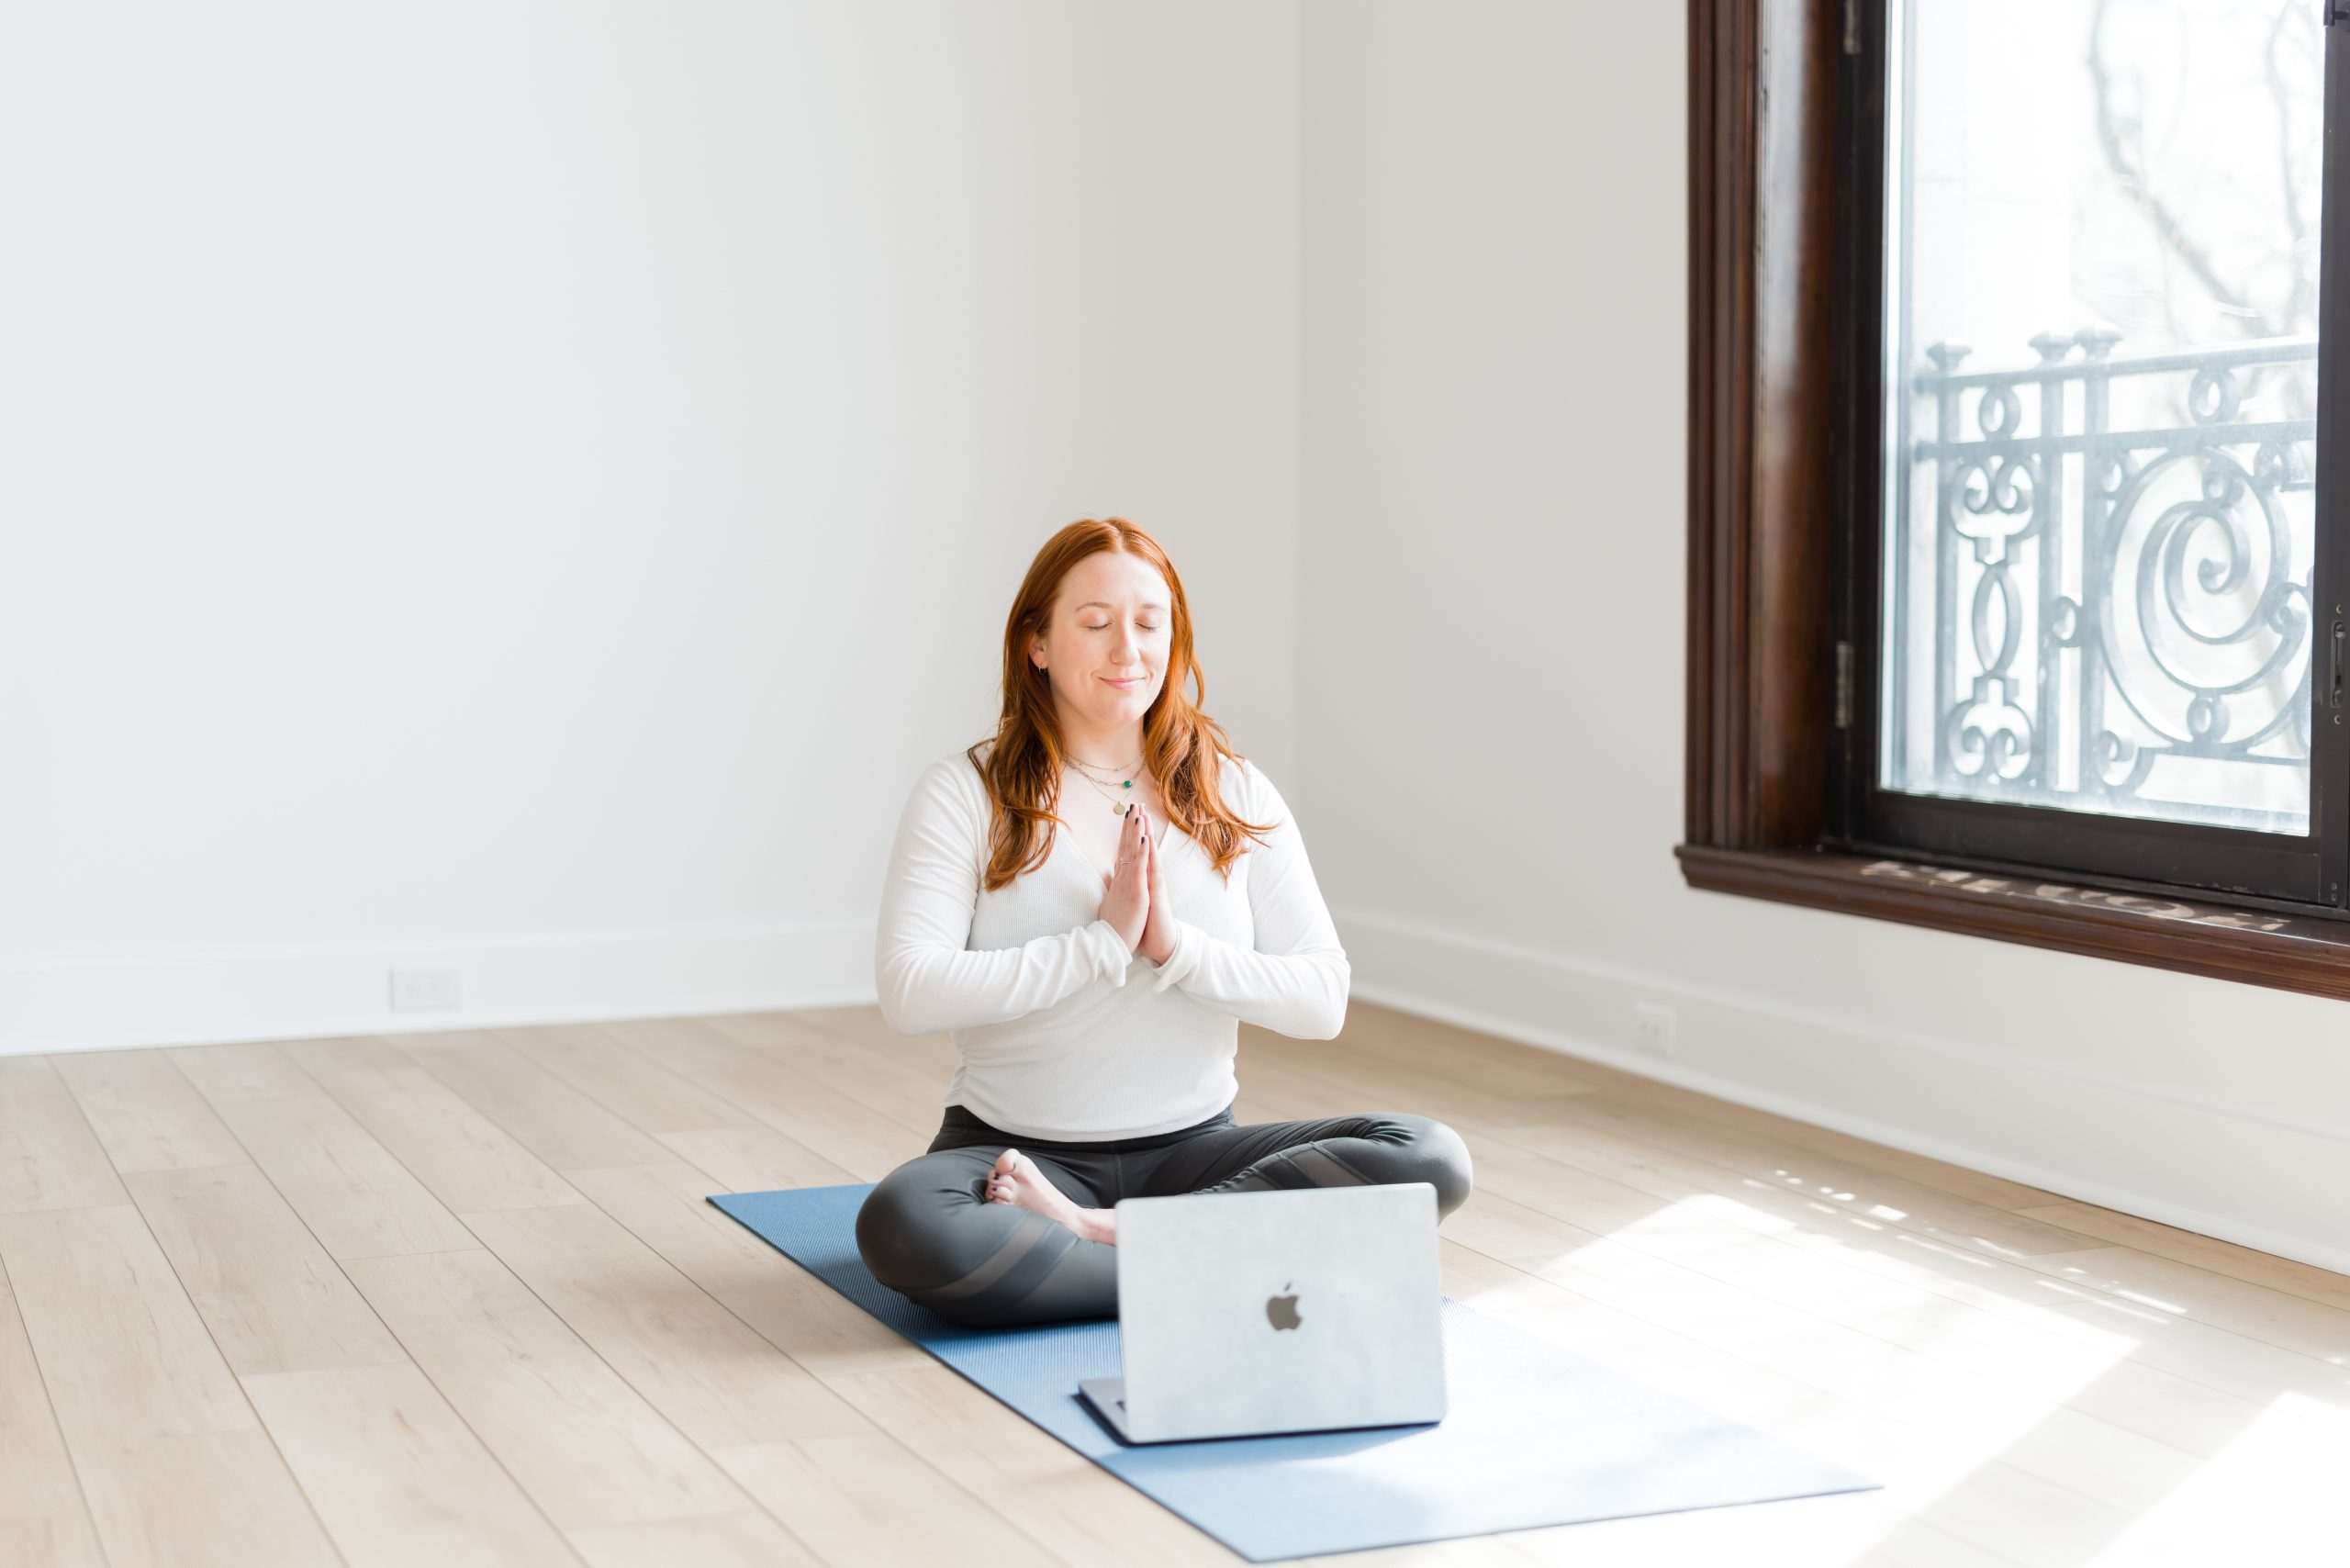 Katie sitting in a mindful pose in front of a laptop on a yoga mat